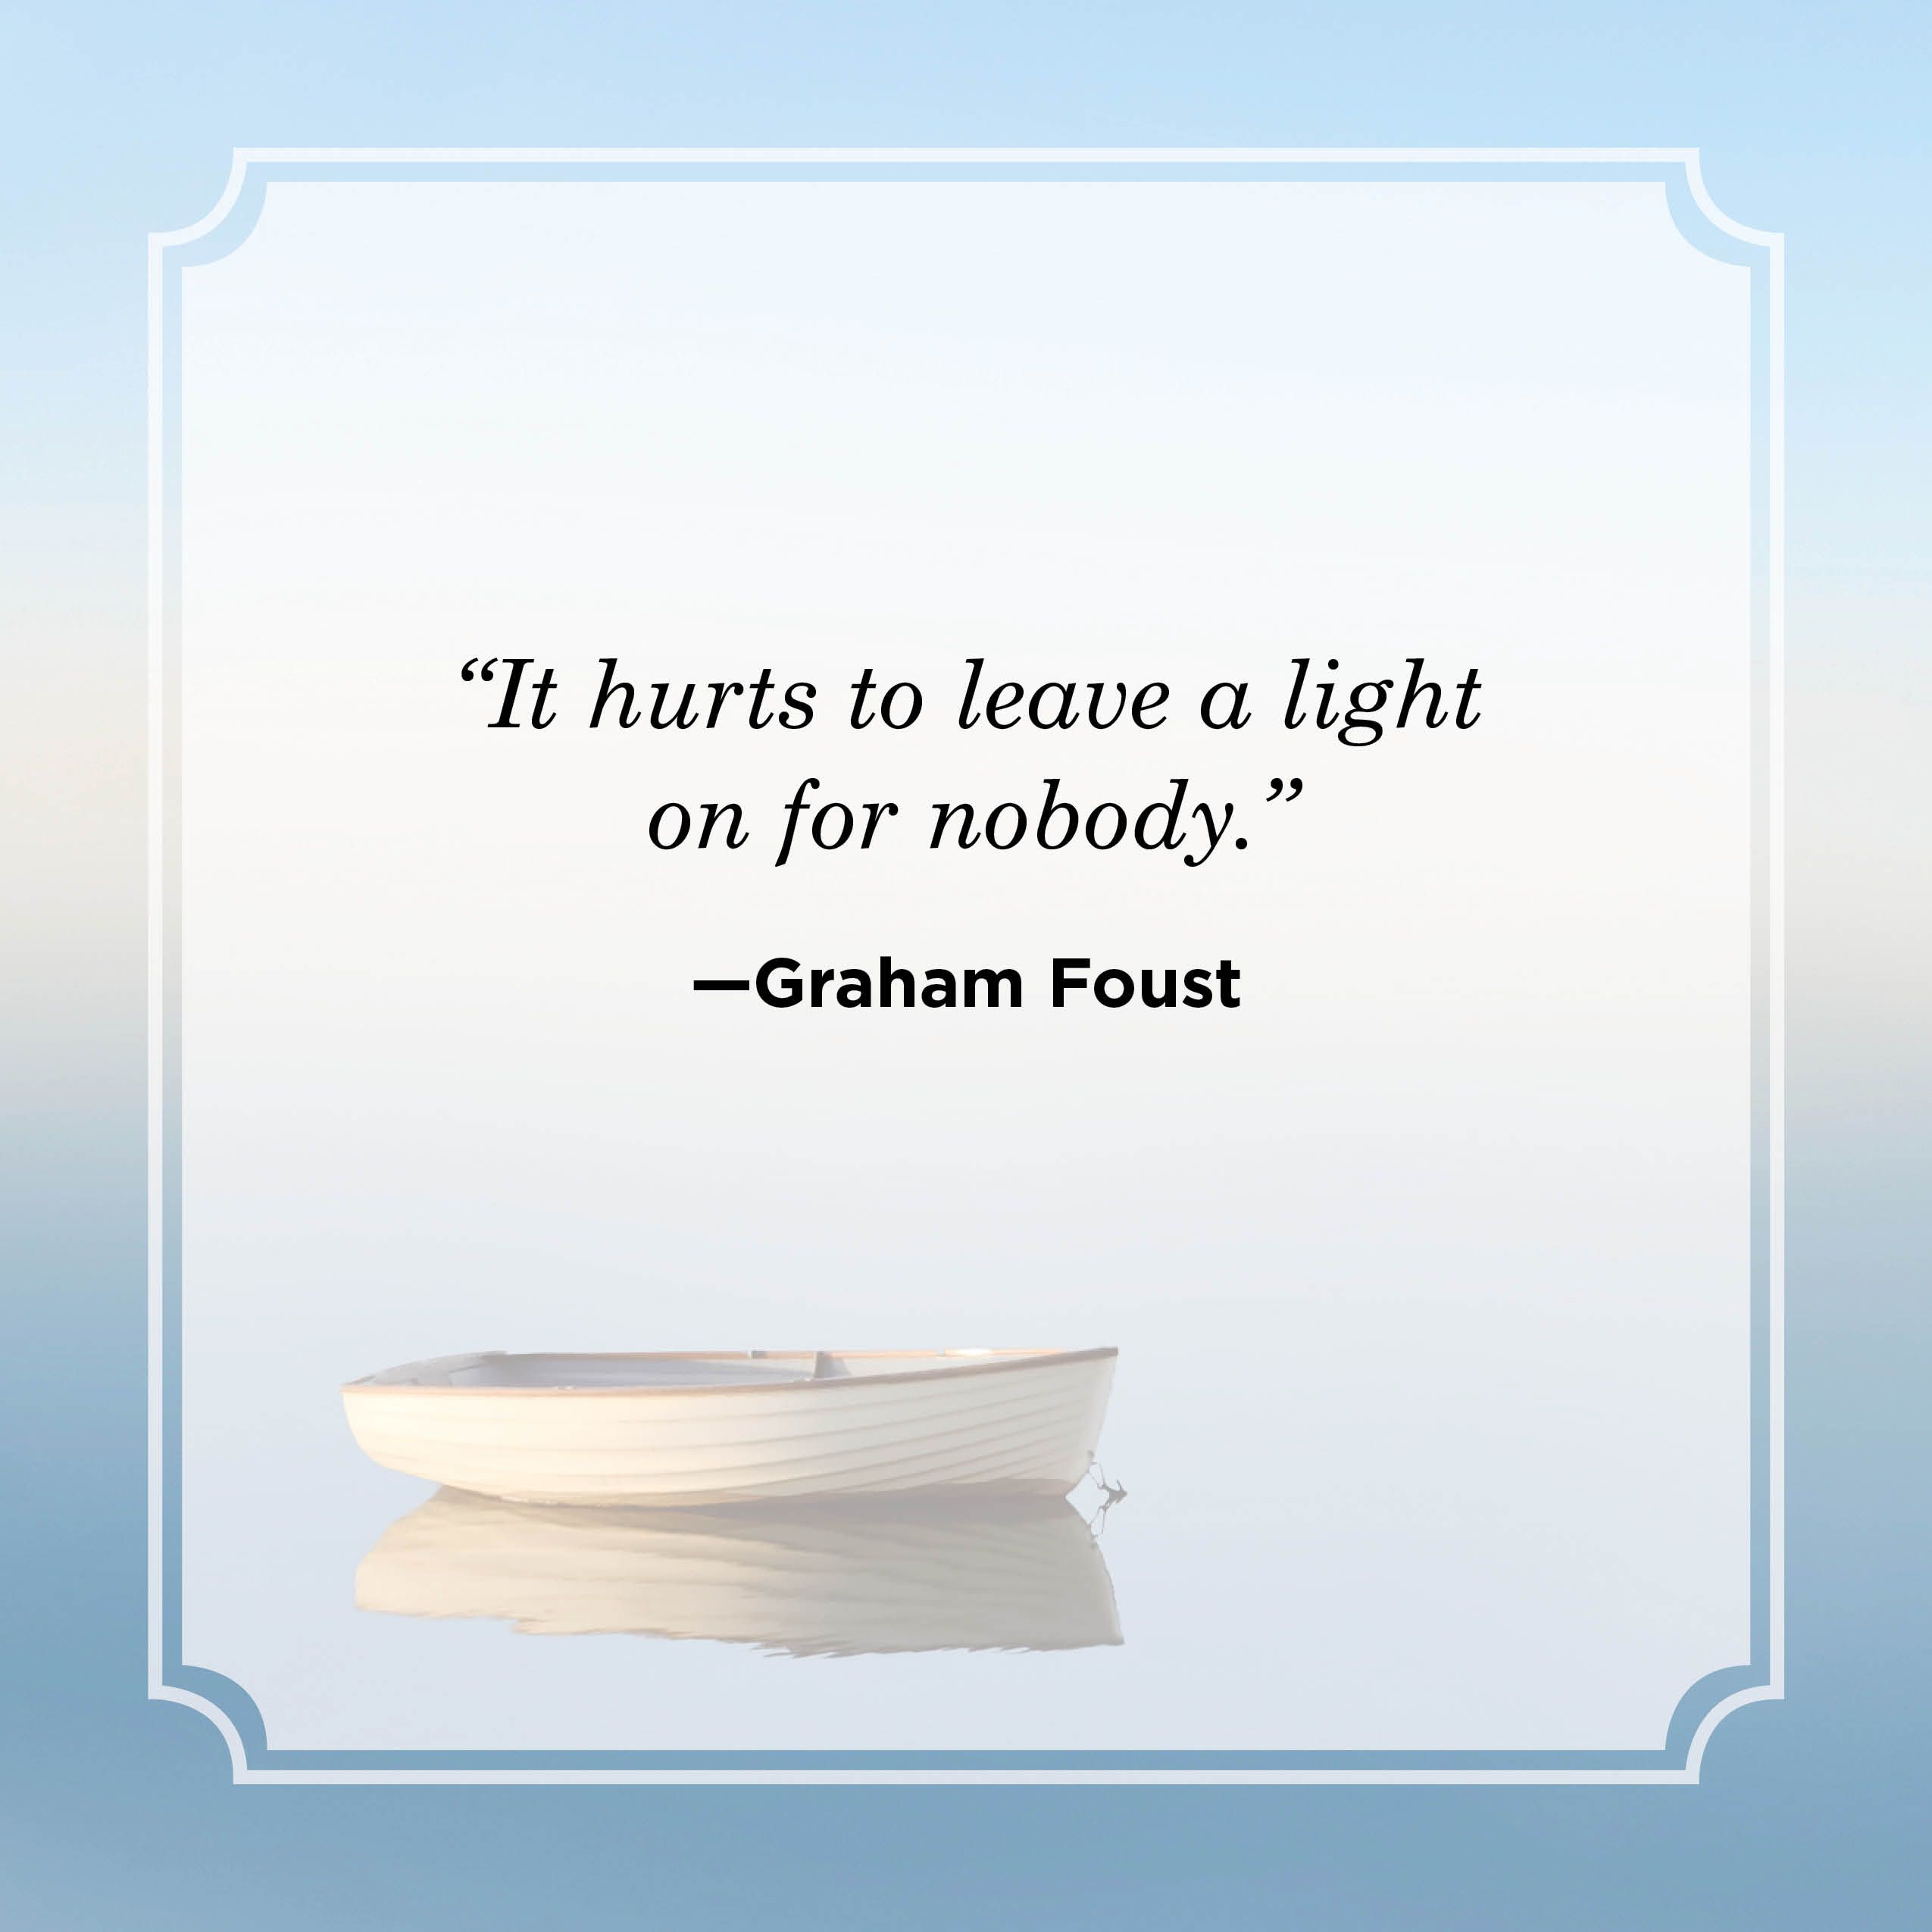 quotes about pain and hurt